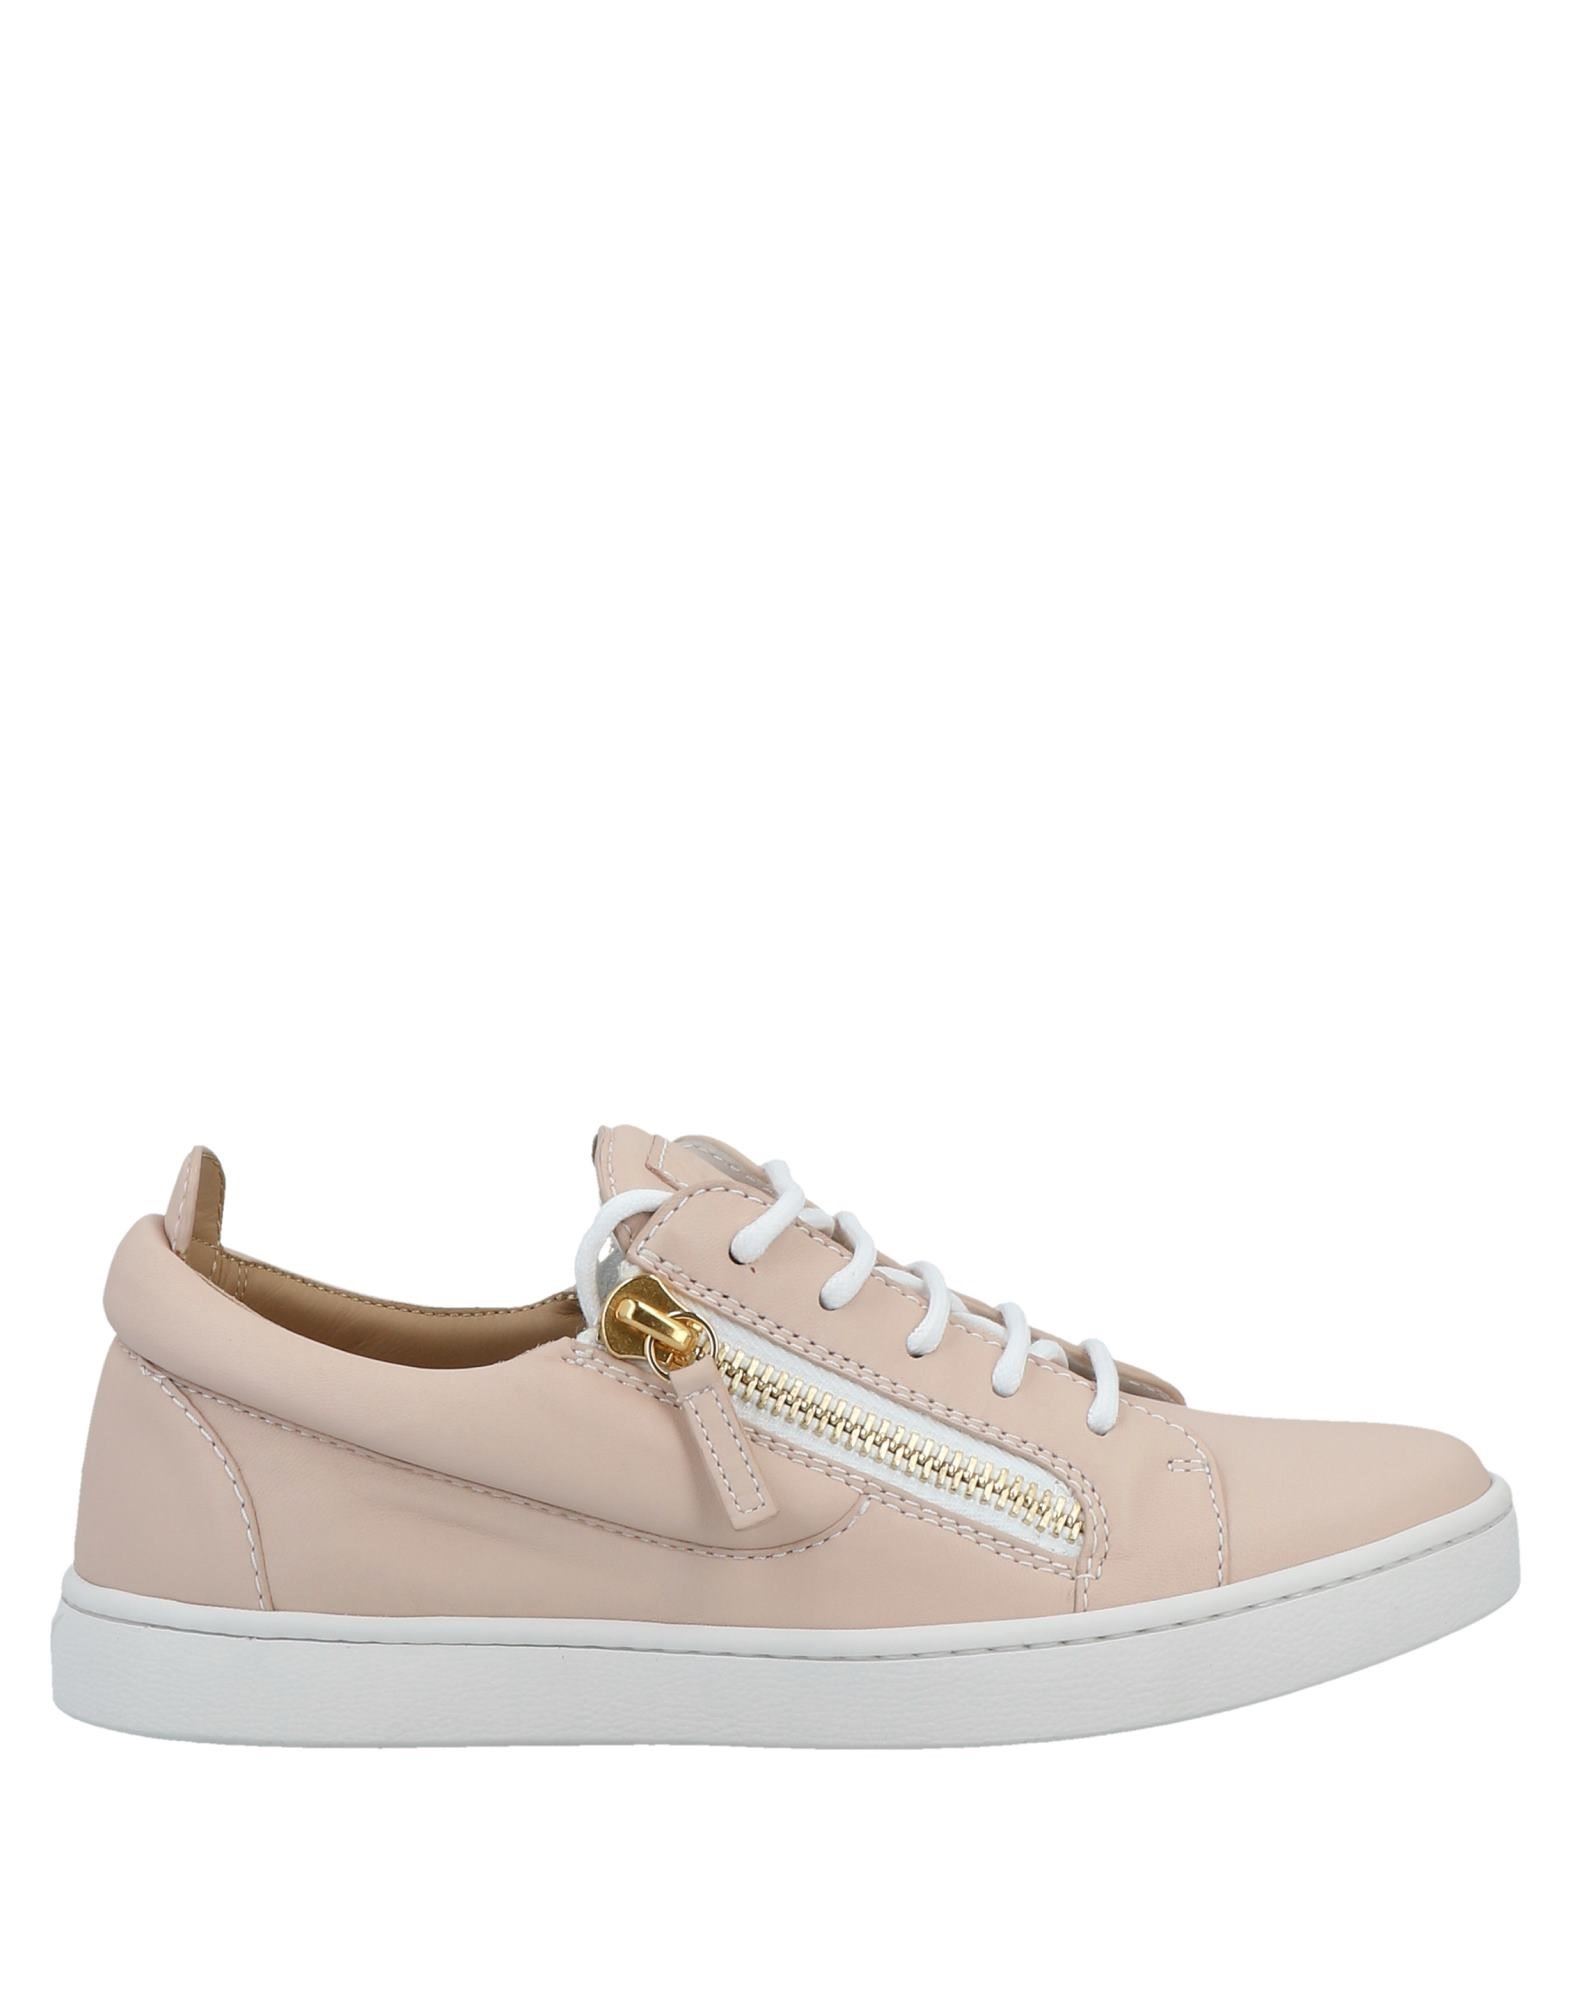 Shop Giuseppe Zanotti Woman Sneakers Blush Size 8 Soft Leather In Pink